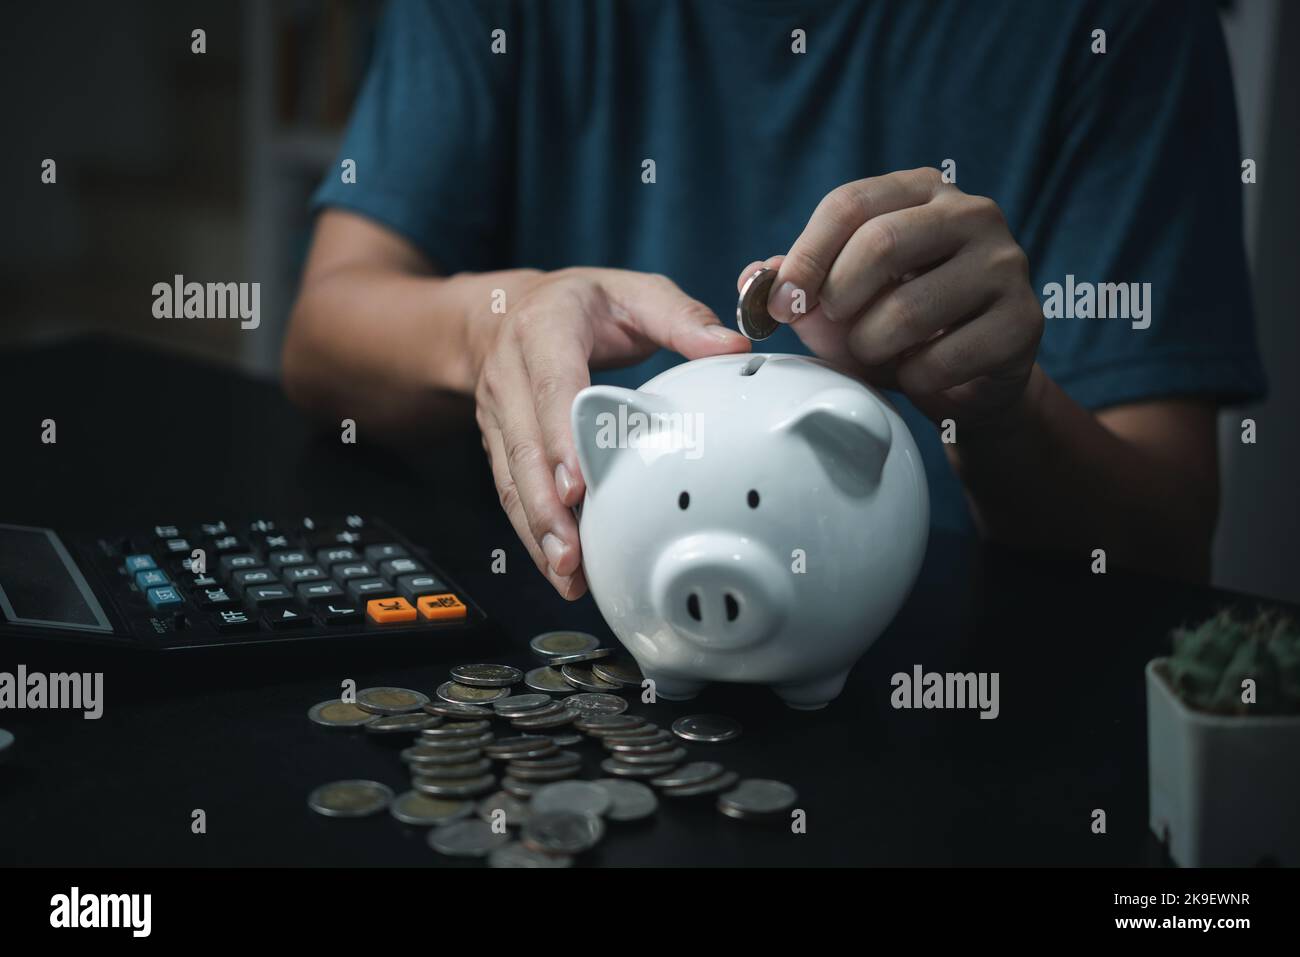 Saving money and coin Piggy bank.Business finance investment banking economy concept. Stock Photo